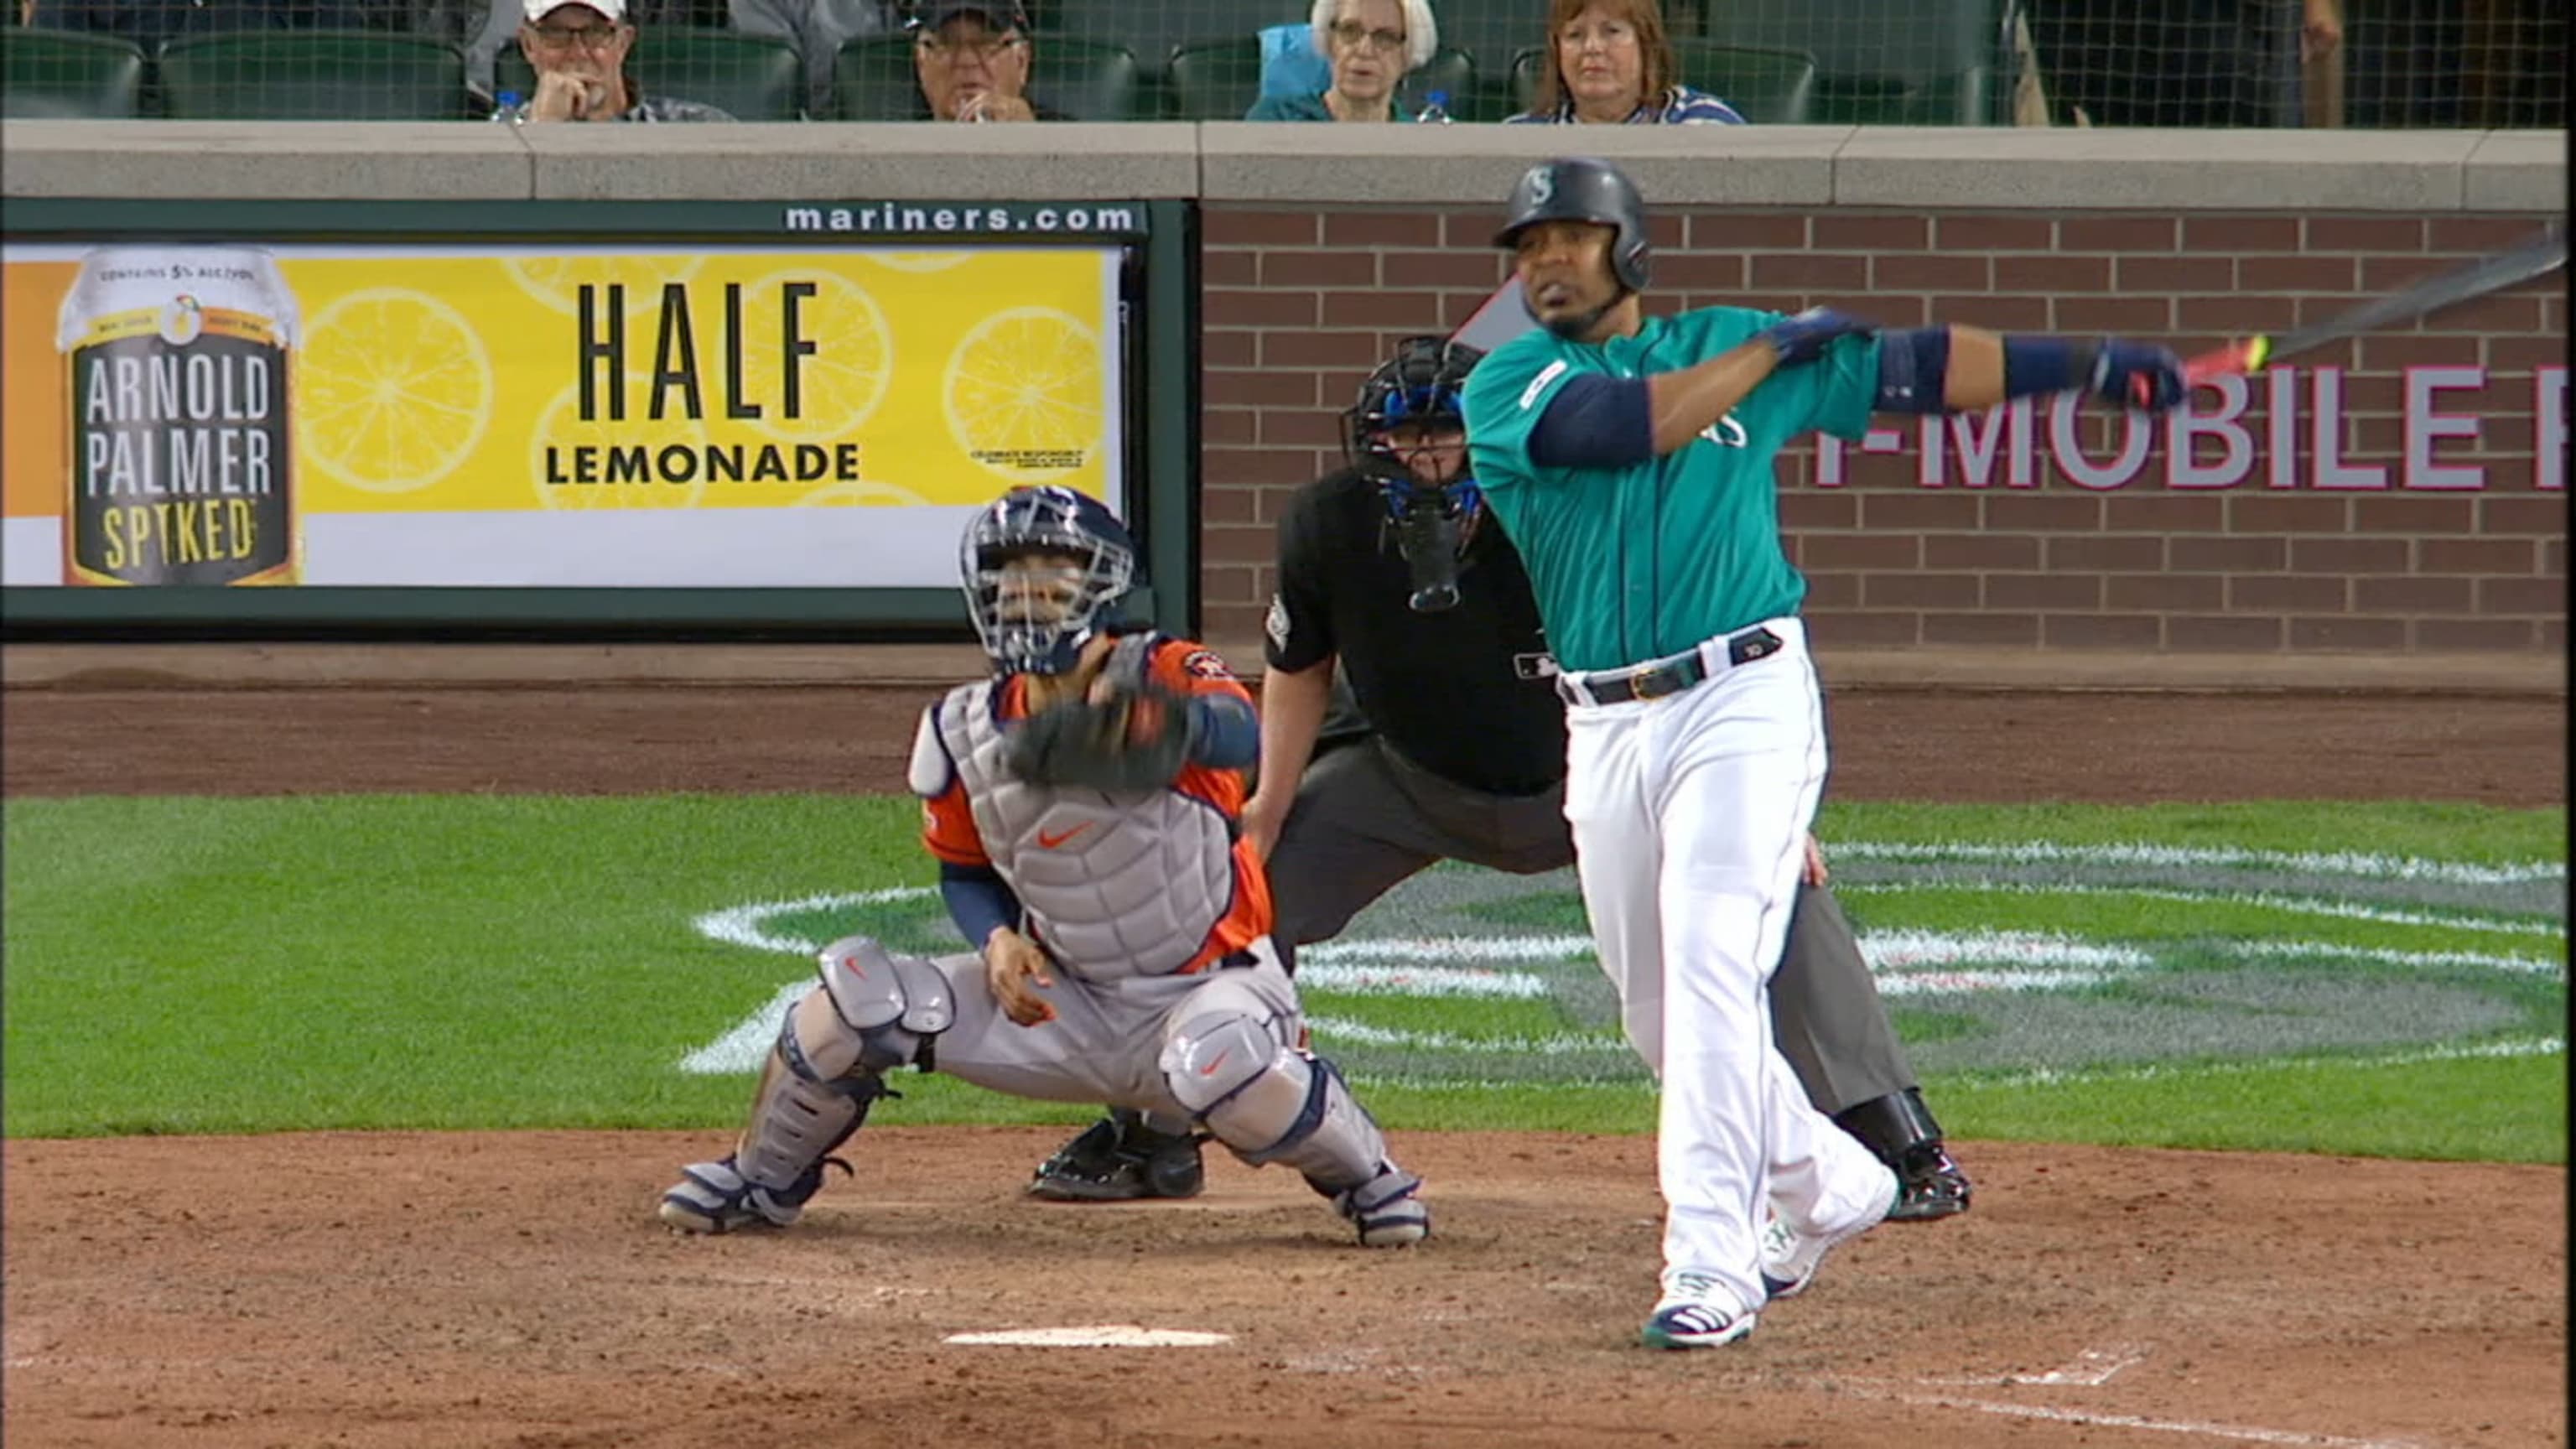 Mariners Dropping Teal, Going Cream and Gold in 2014